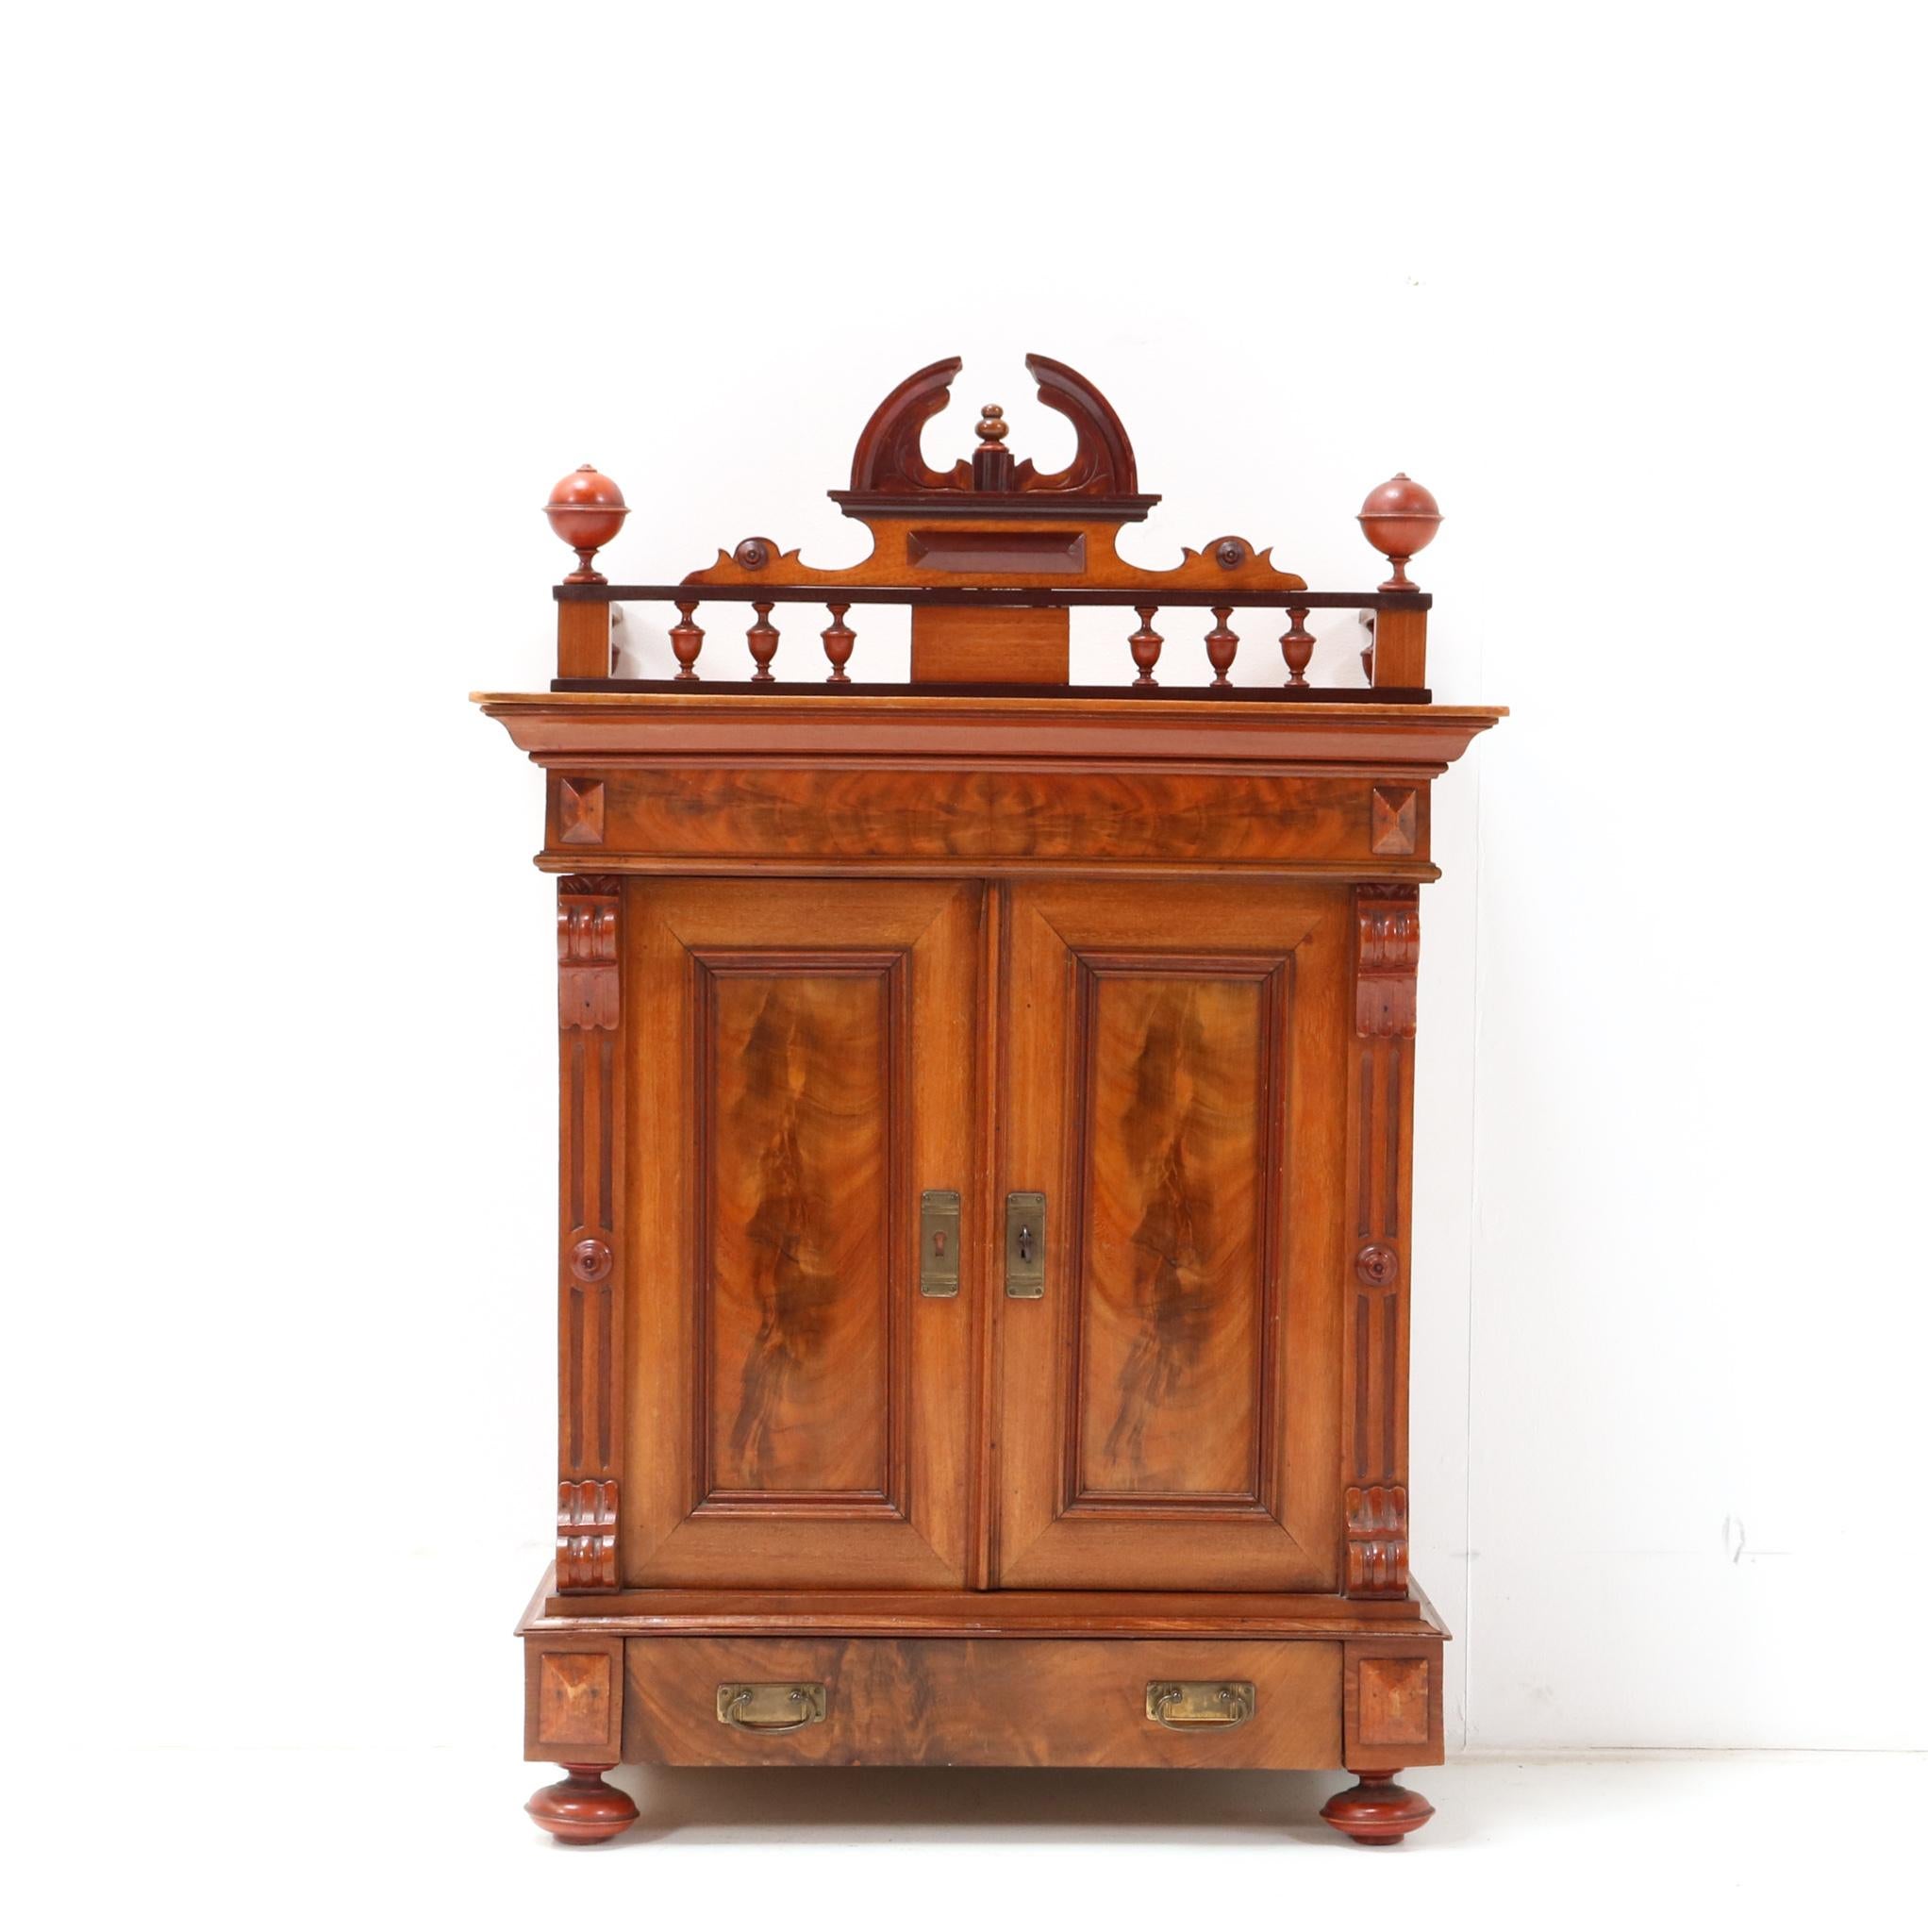 Magnificent and ultra rare Gründerzeit wall cabinet or miniature cabinet.
Striking German design from the 1890s.
Solid walnut and walnut veneer with original brass key plates and brass handles
on doors and drawer.
This wonderful Gründerzeit wall